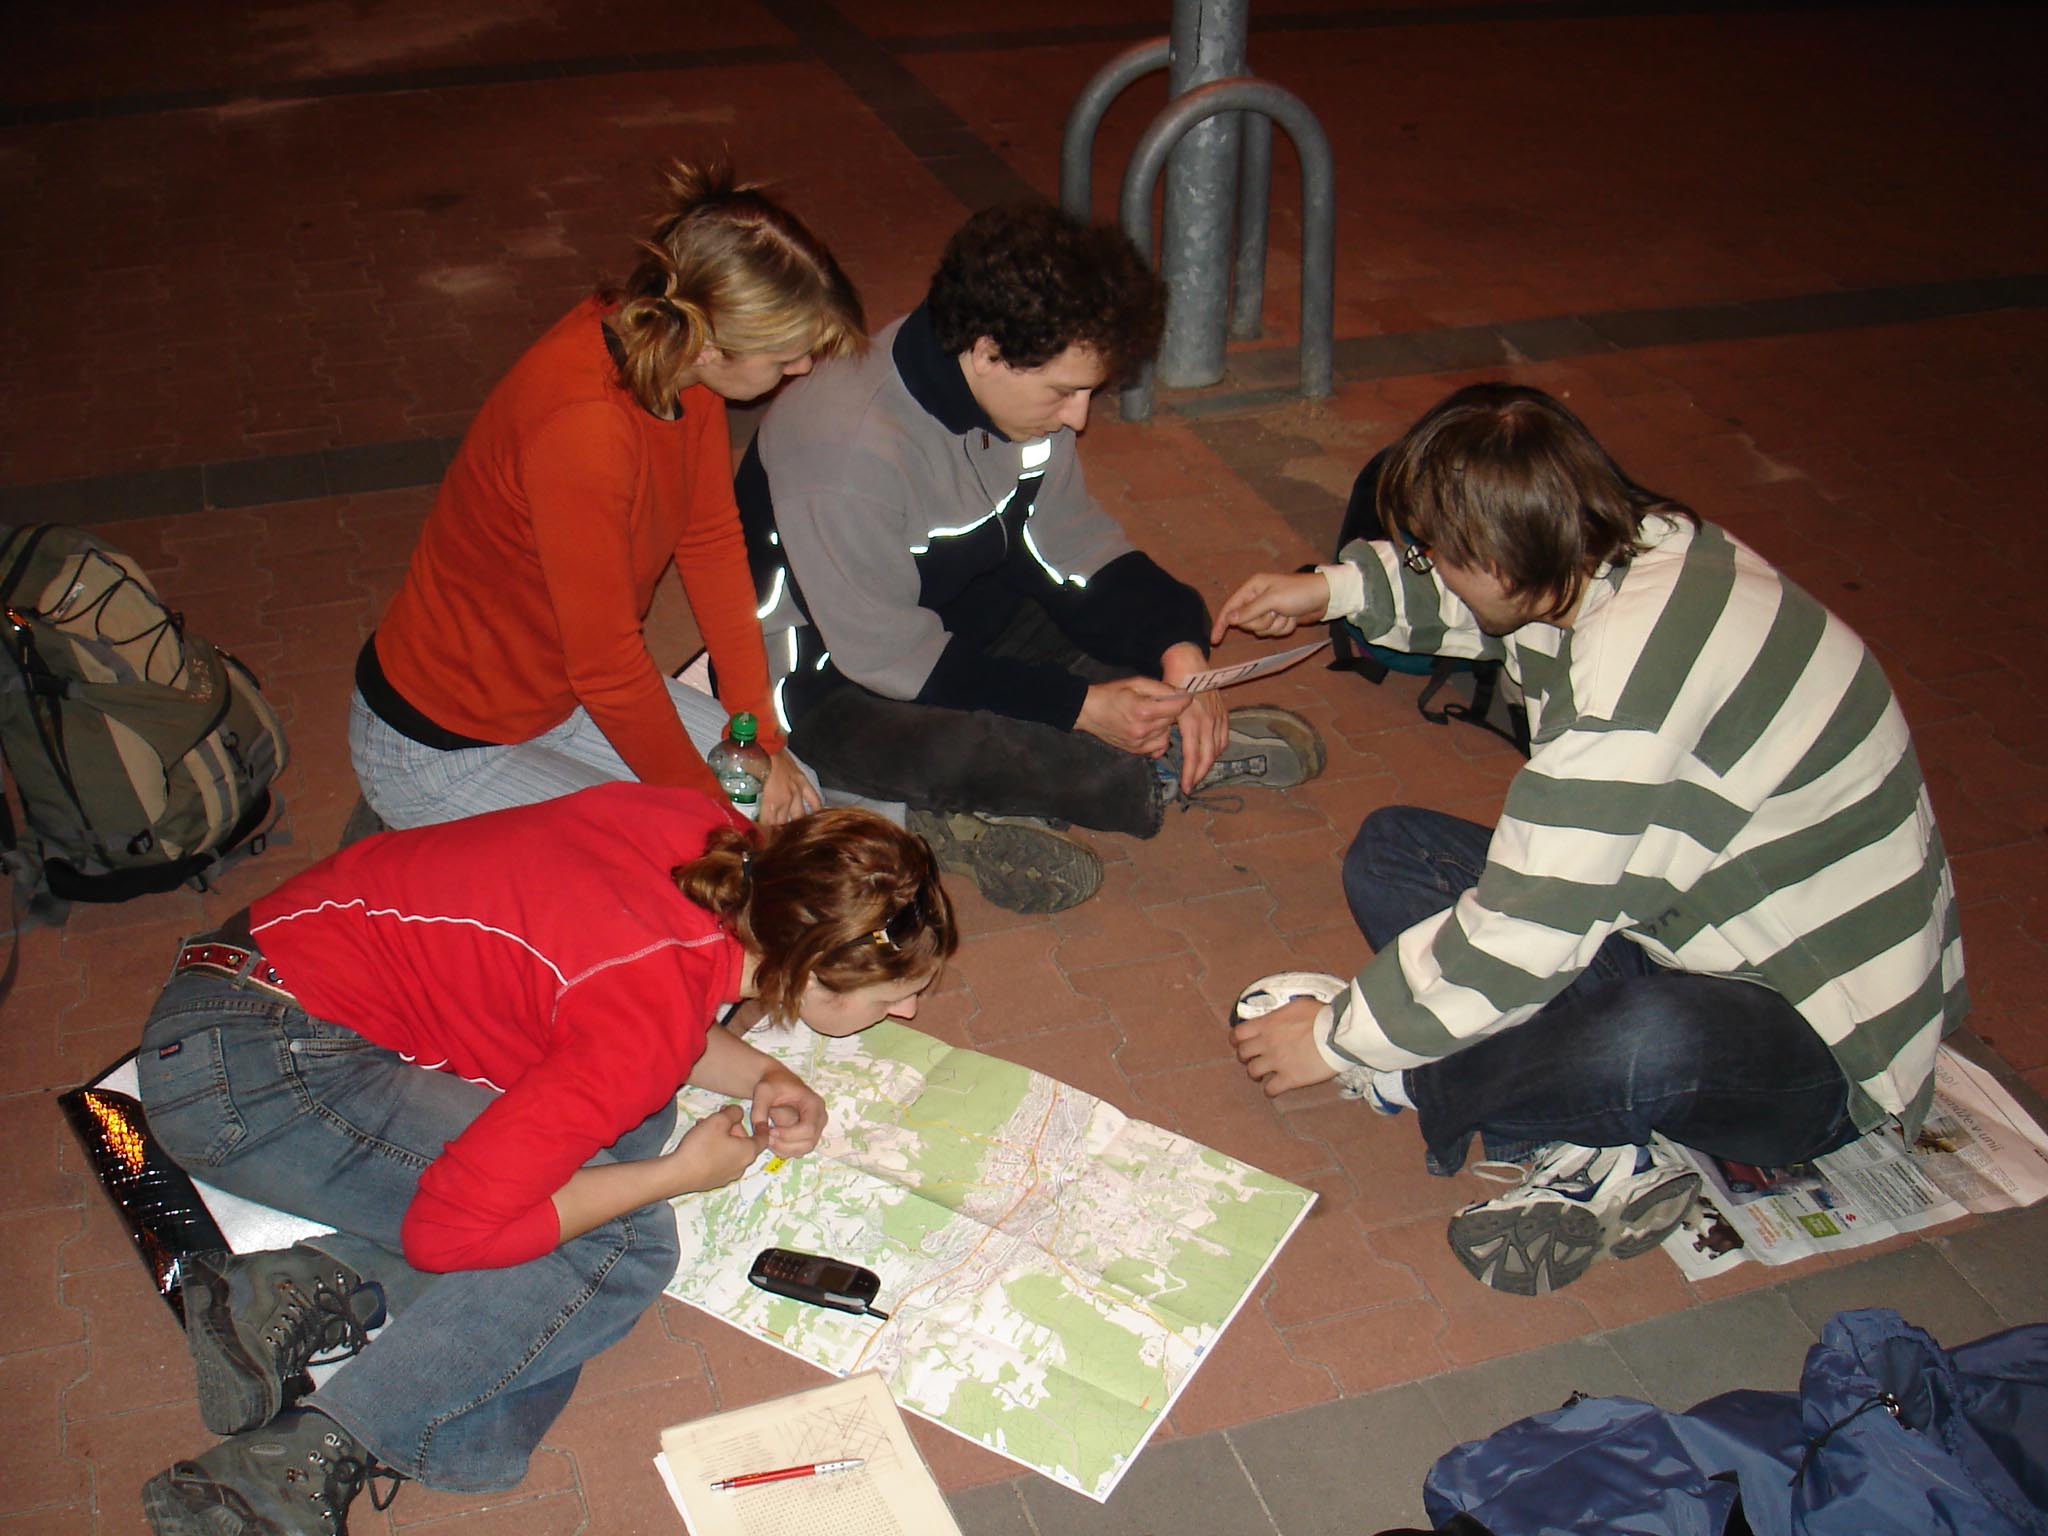 At the outdoor coding game OSUD4 in Zlín.